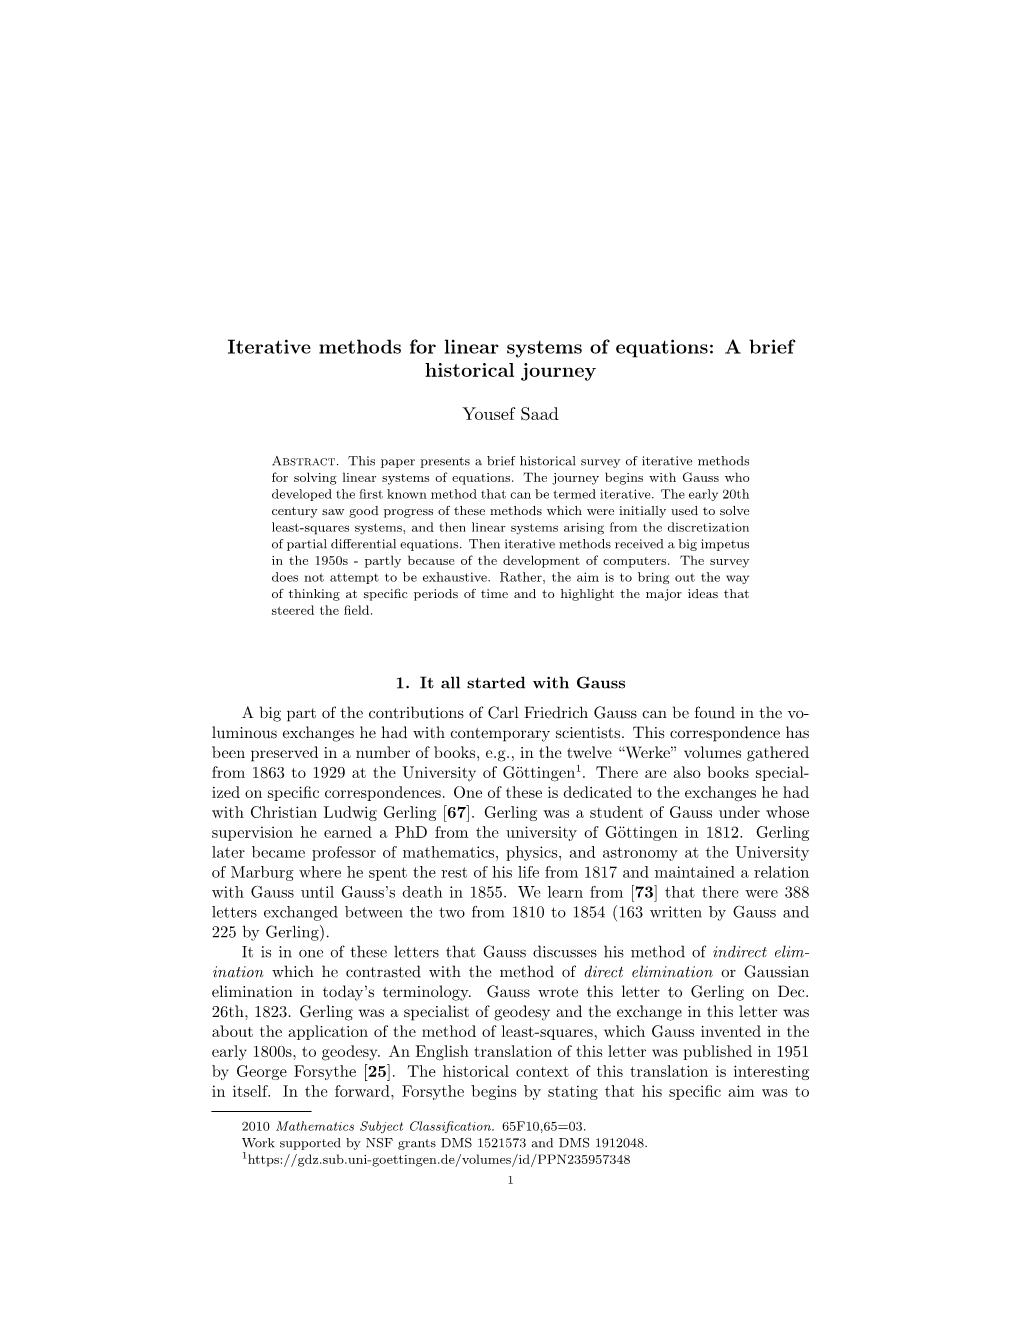 Iterative Methods for Linear Systems of Equations: a Brief Historical Journey